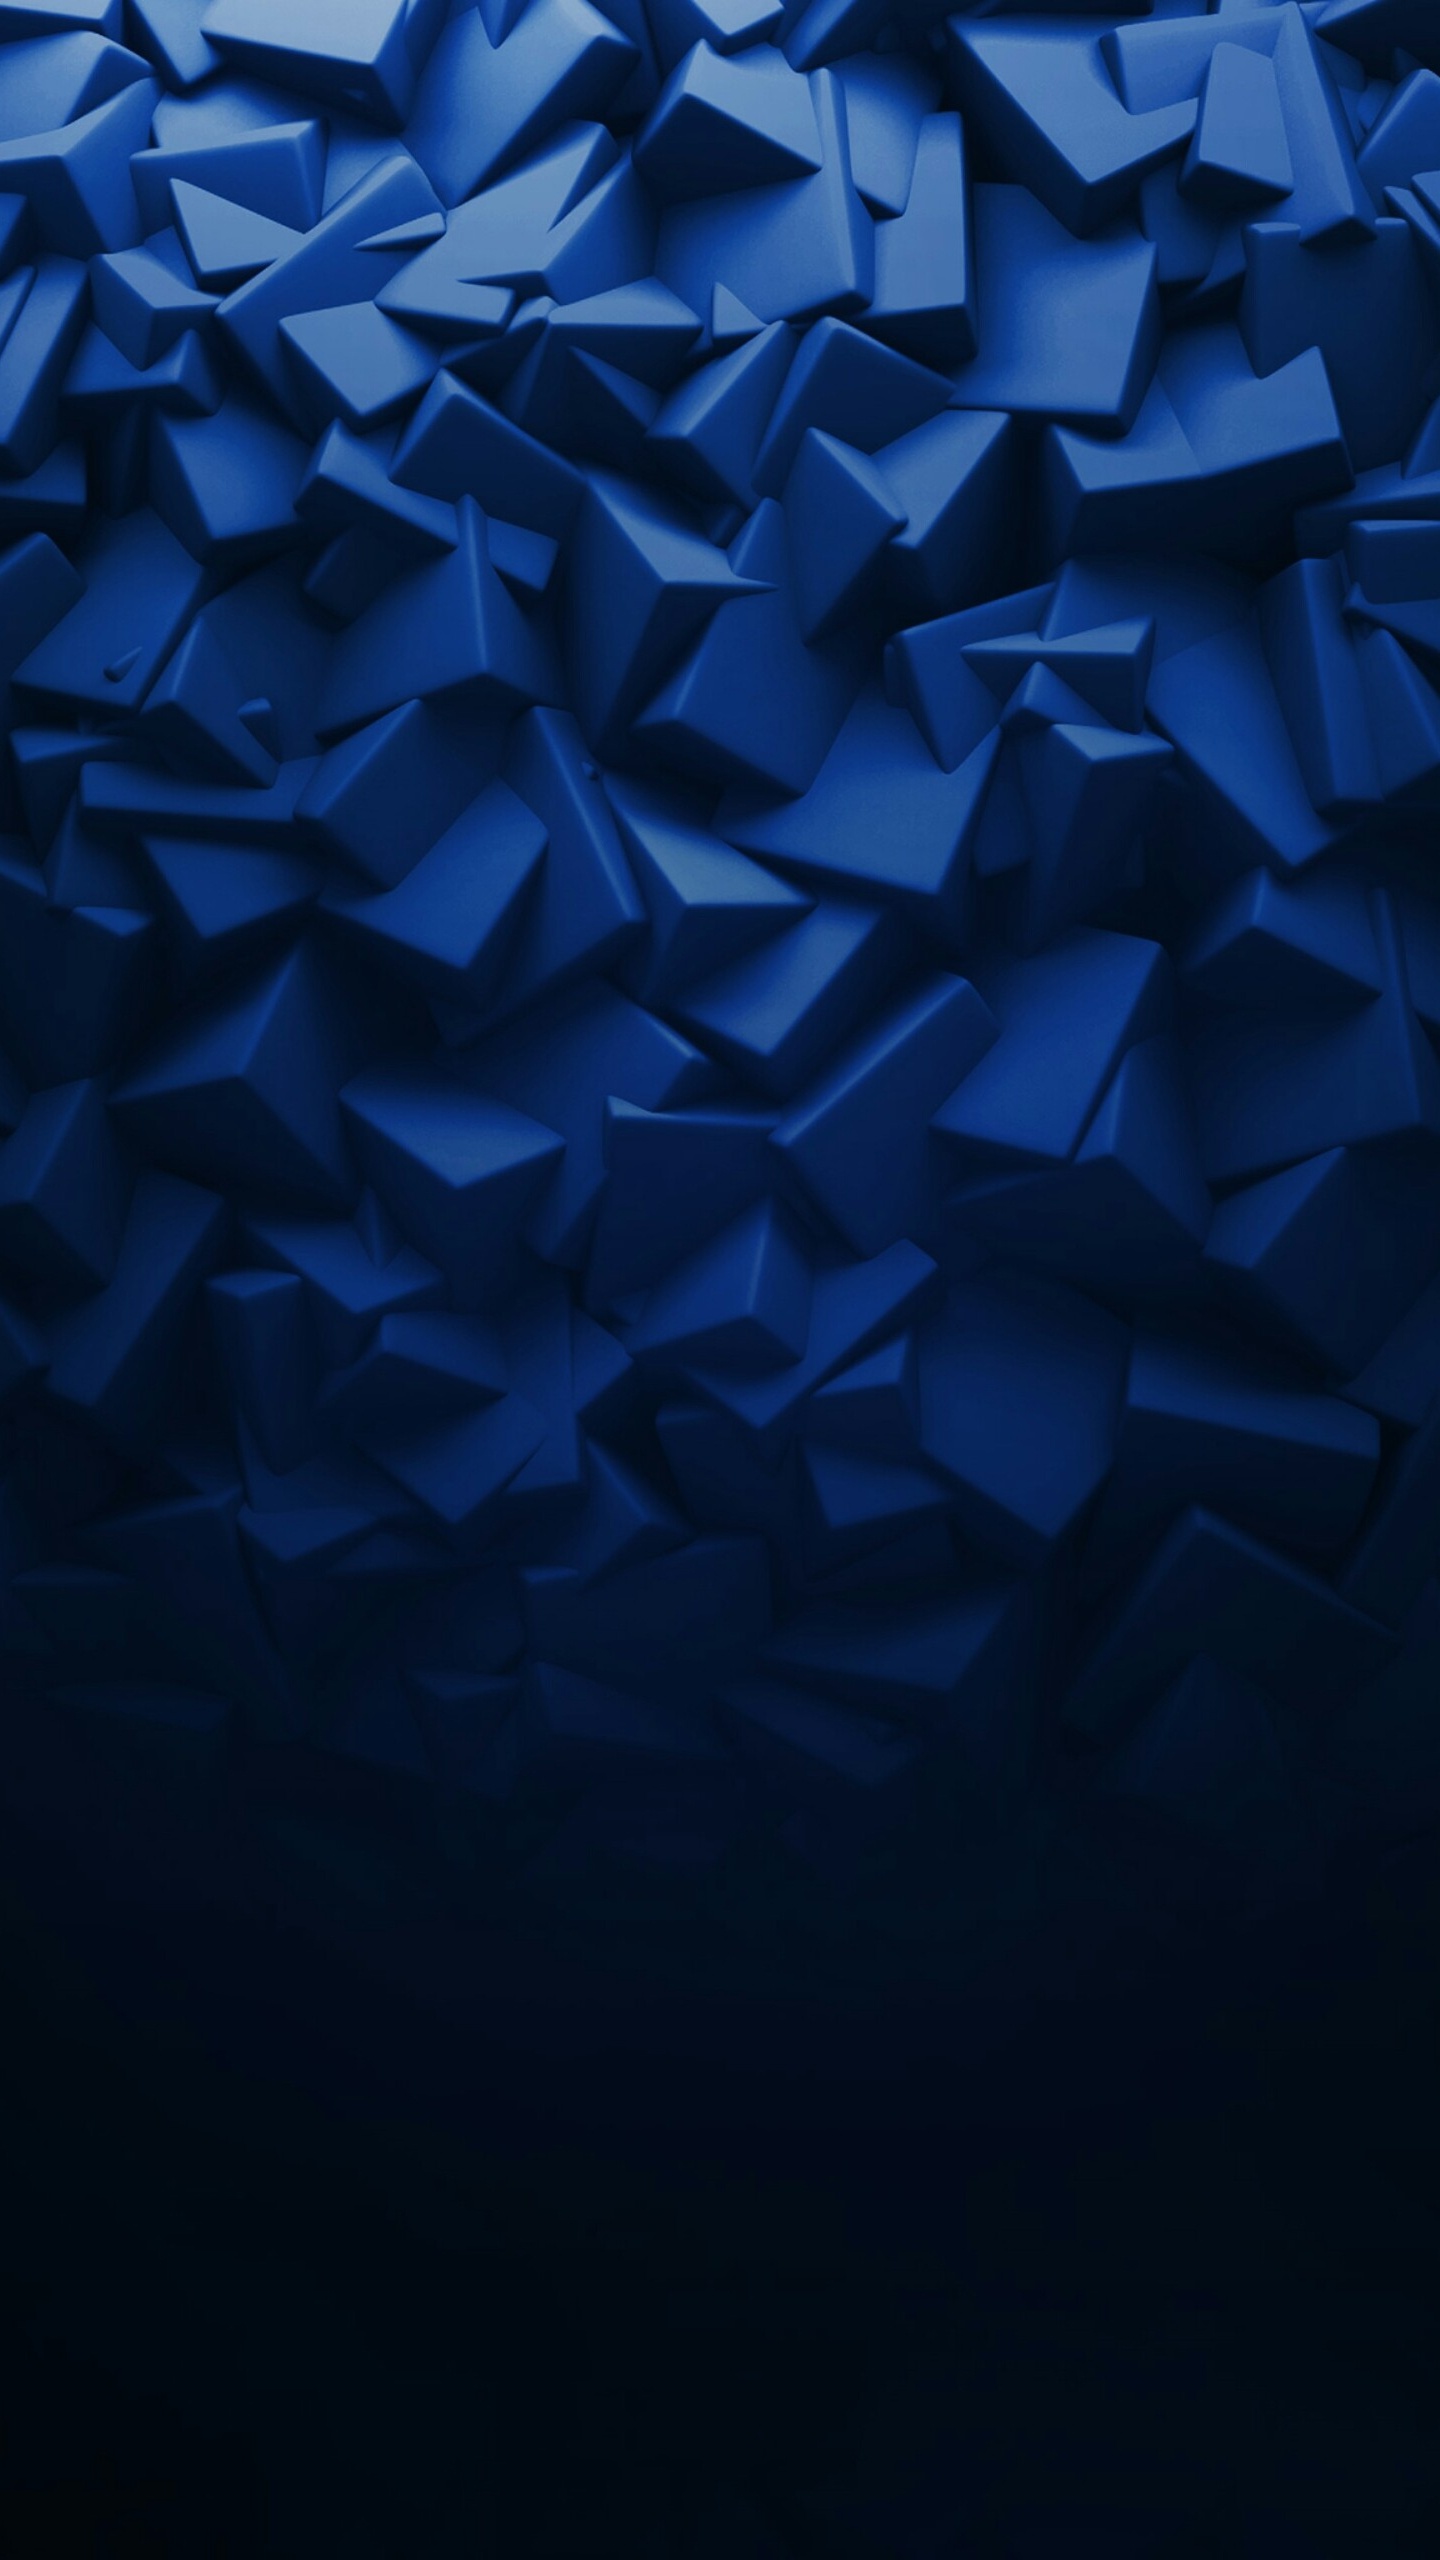 Blue and White Star Illustration. Wallpaper in 1440x2560 Resolution